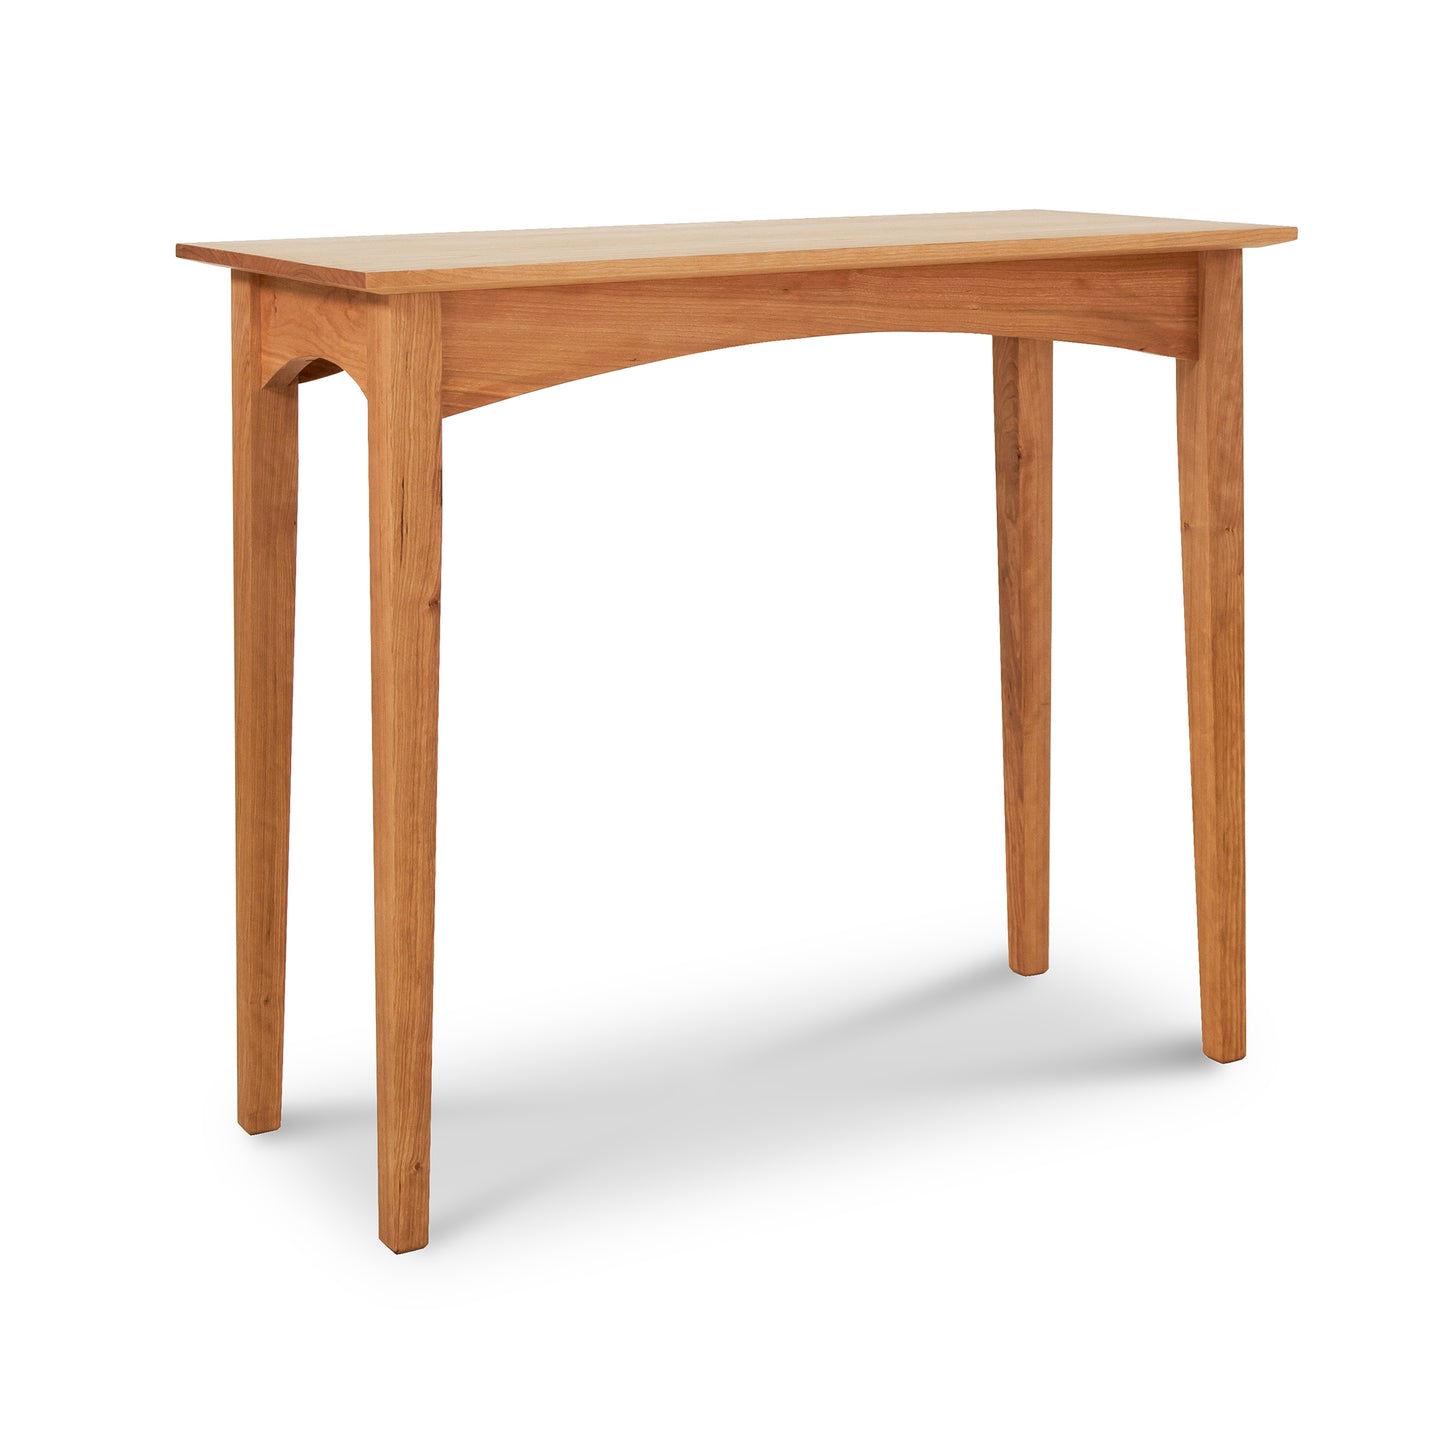 A American Shaker Sofa Table from Maple Corner Woodworks with a rectangular top and four legs, eco-friendly solid wood, isolated on a white background.